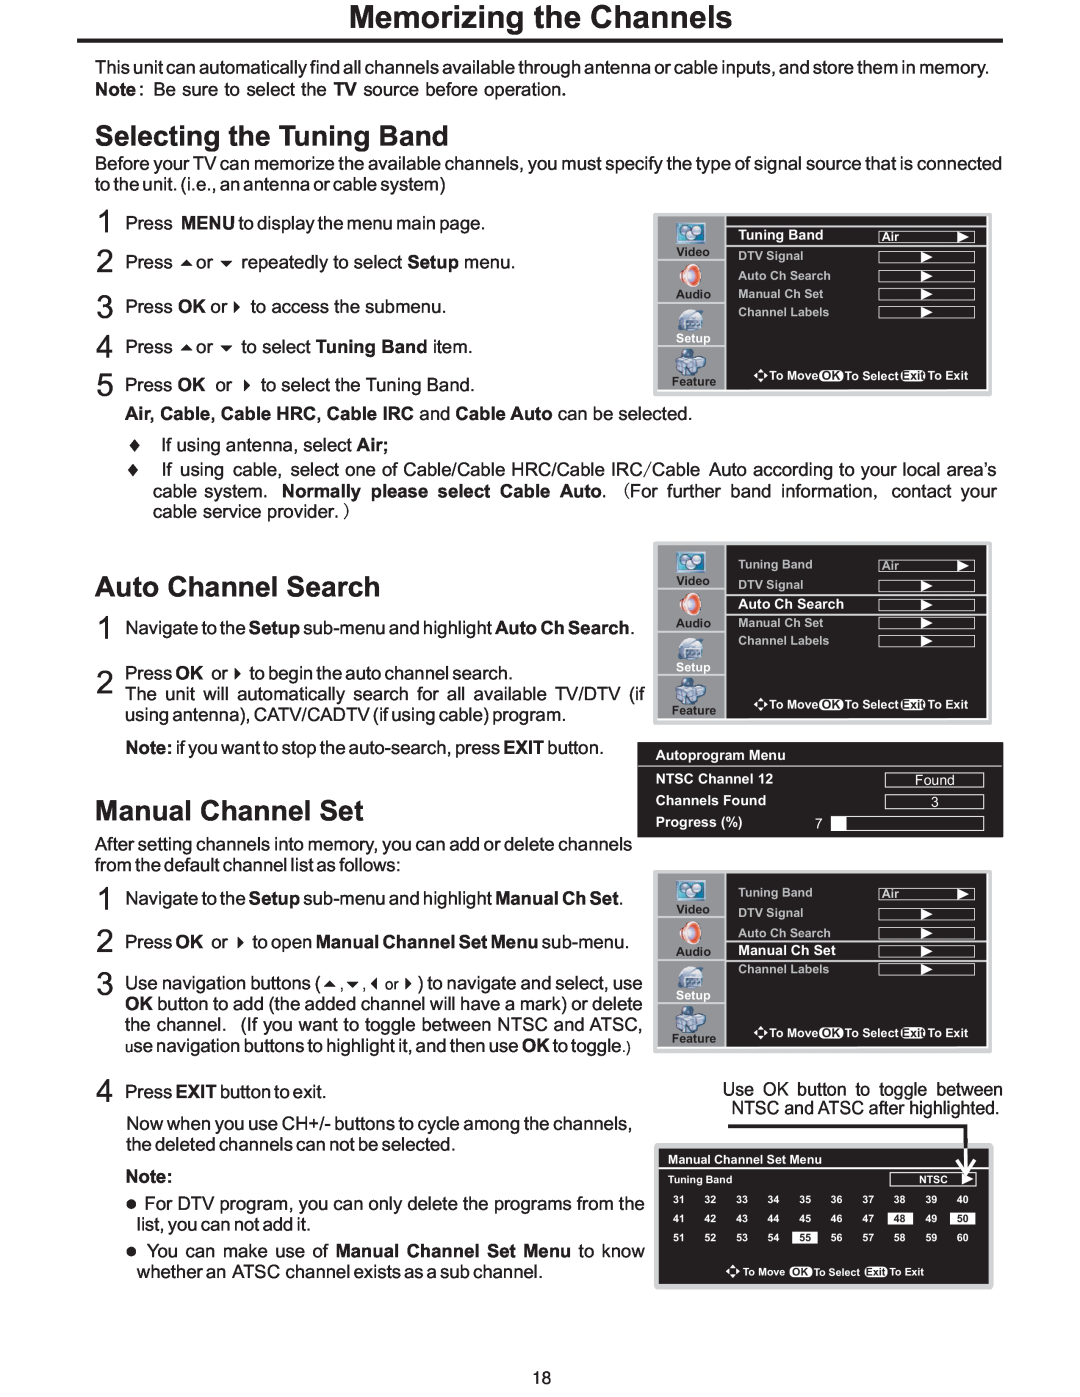 Polaroid PLA-4248 manual Memorizing the Channels, Selecting the Tuning Band, Auto Channel Search, Manual Channel Set 